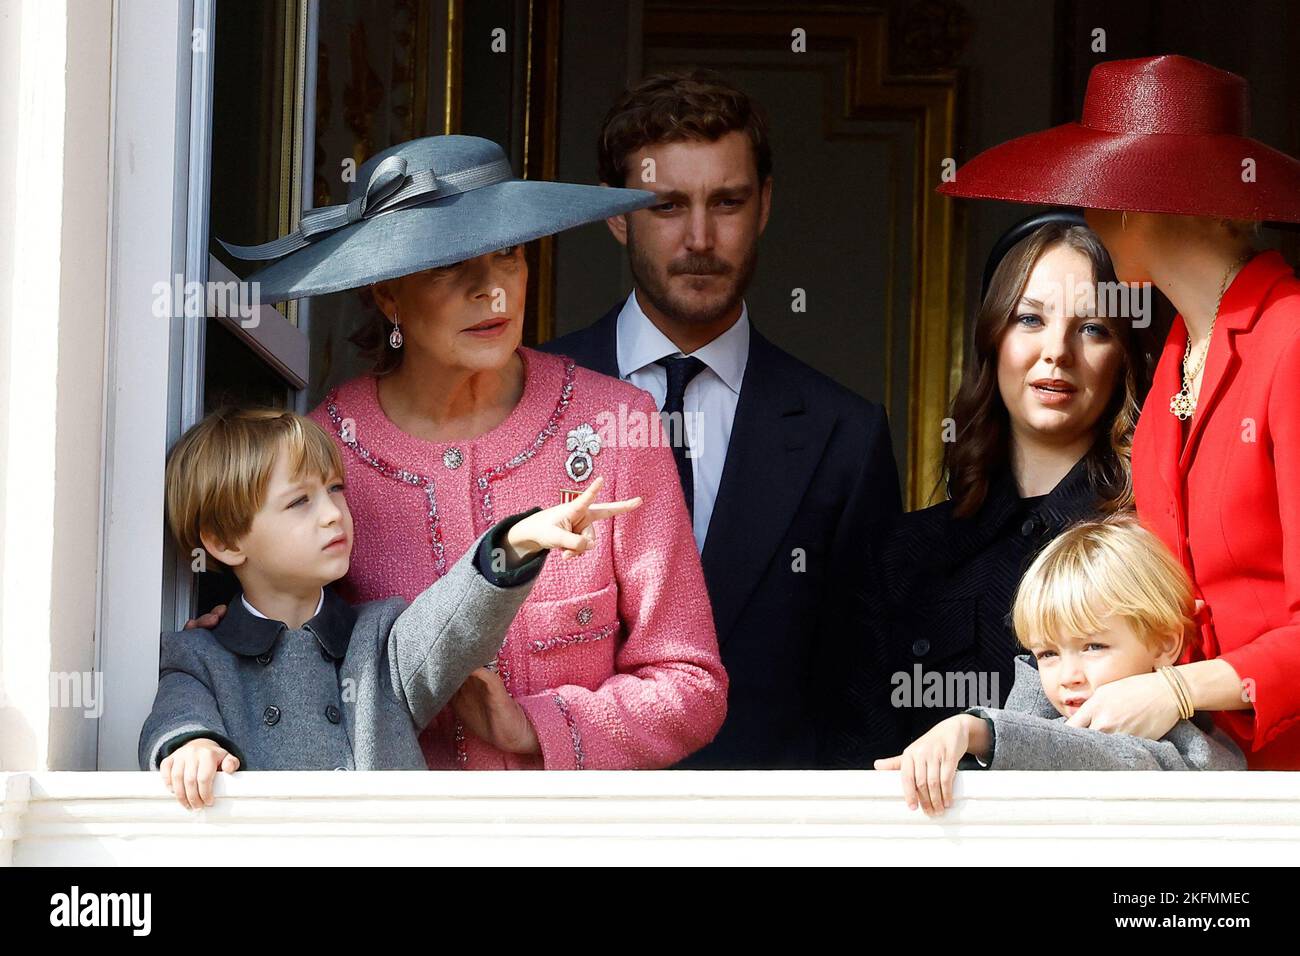 Princess Caroline of Hanover, Pierre Casiraghi and his wife Beatrice Borromeo, Stefano Casiraghi and Francesco Casiraghi, Alexandra of Hanover stand on the Palace balcony during the celebrations marking Monaco's National Day in Monaco, November 19, 2022. REUTERS/Eric Gaillard Stock Photo